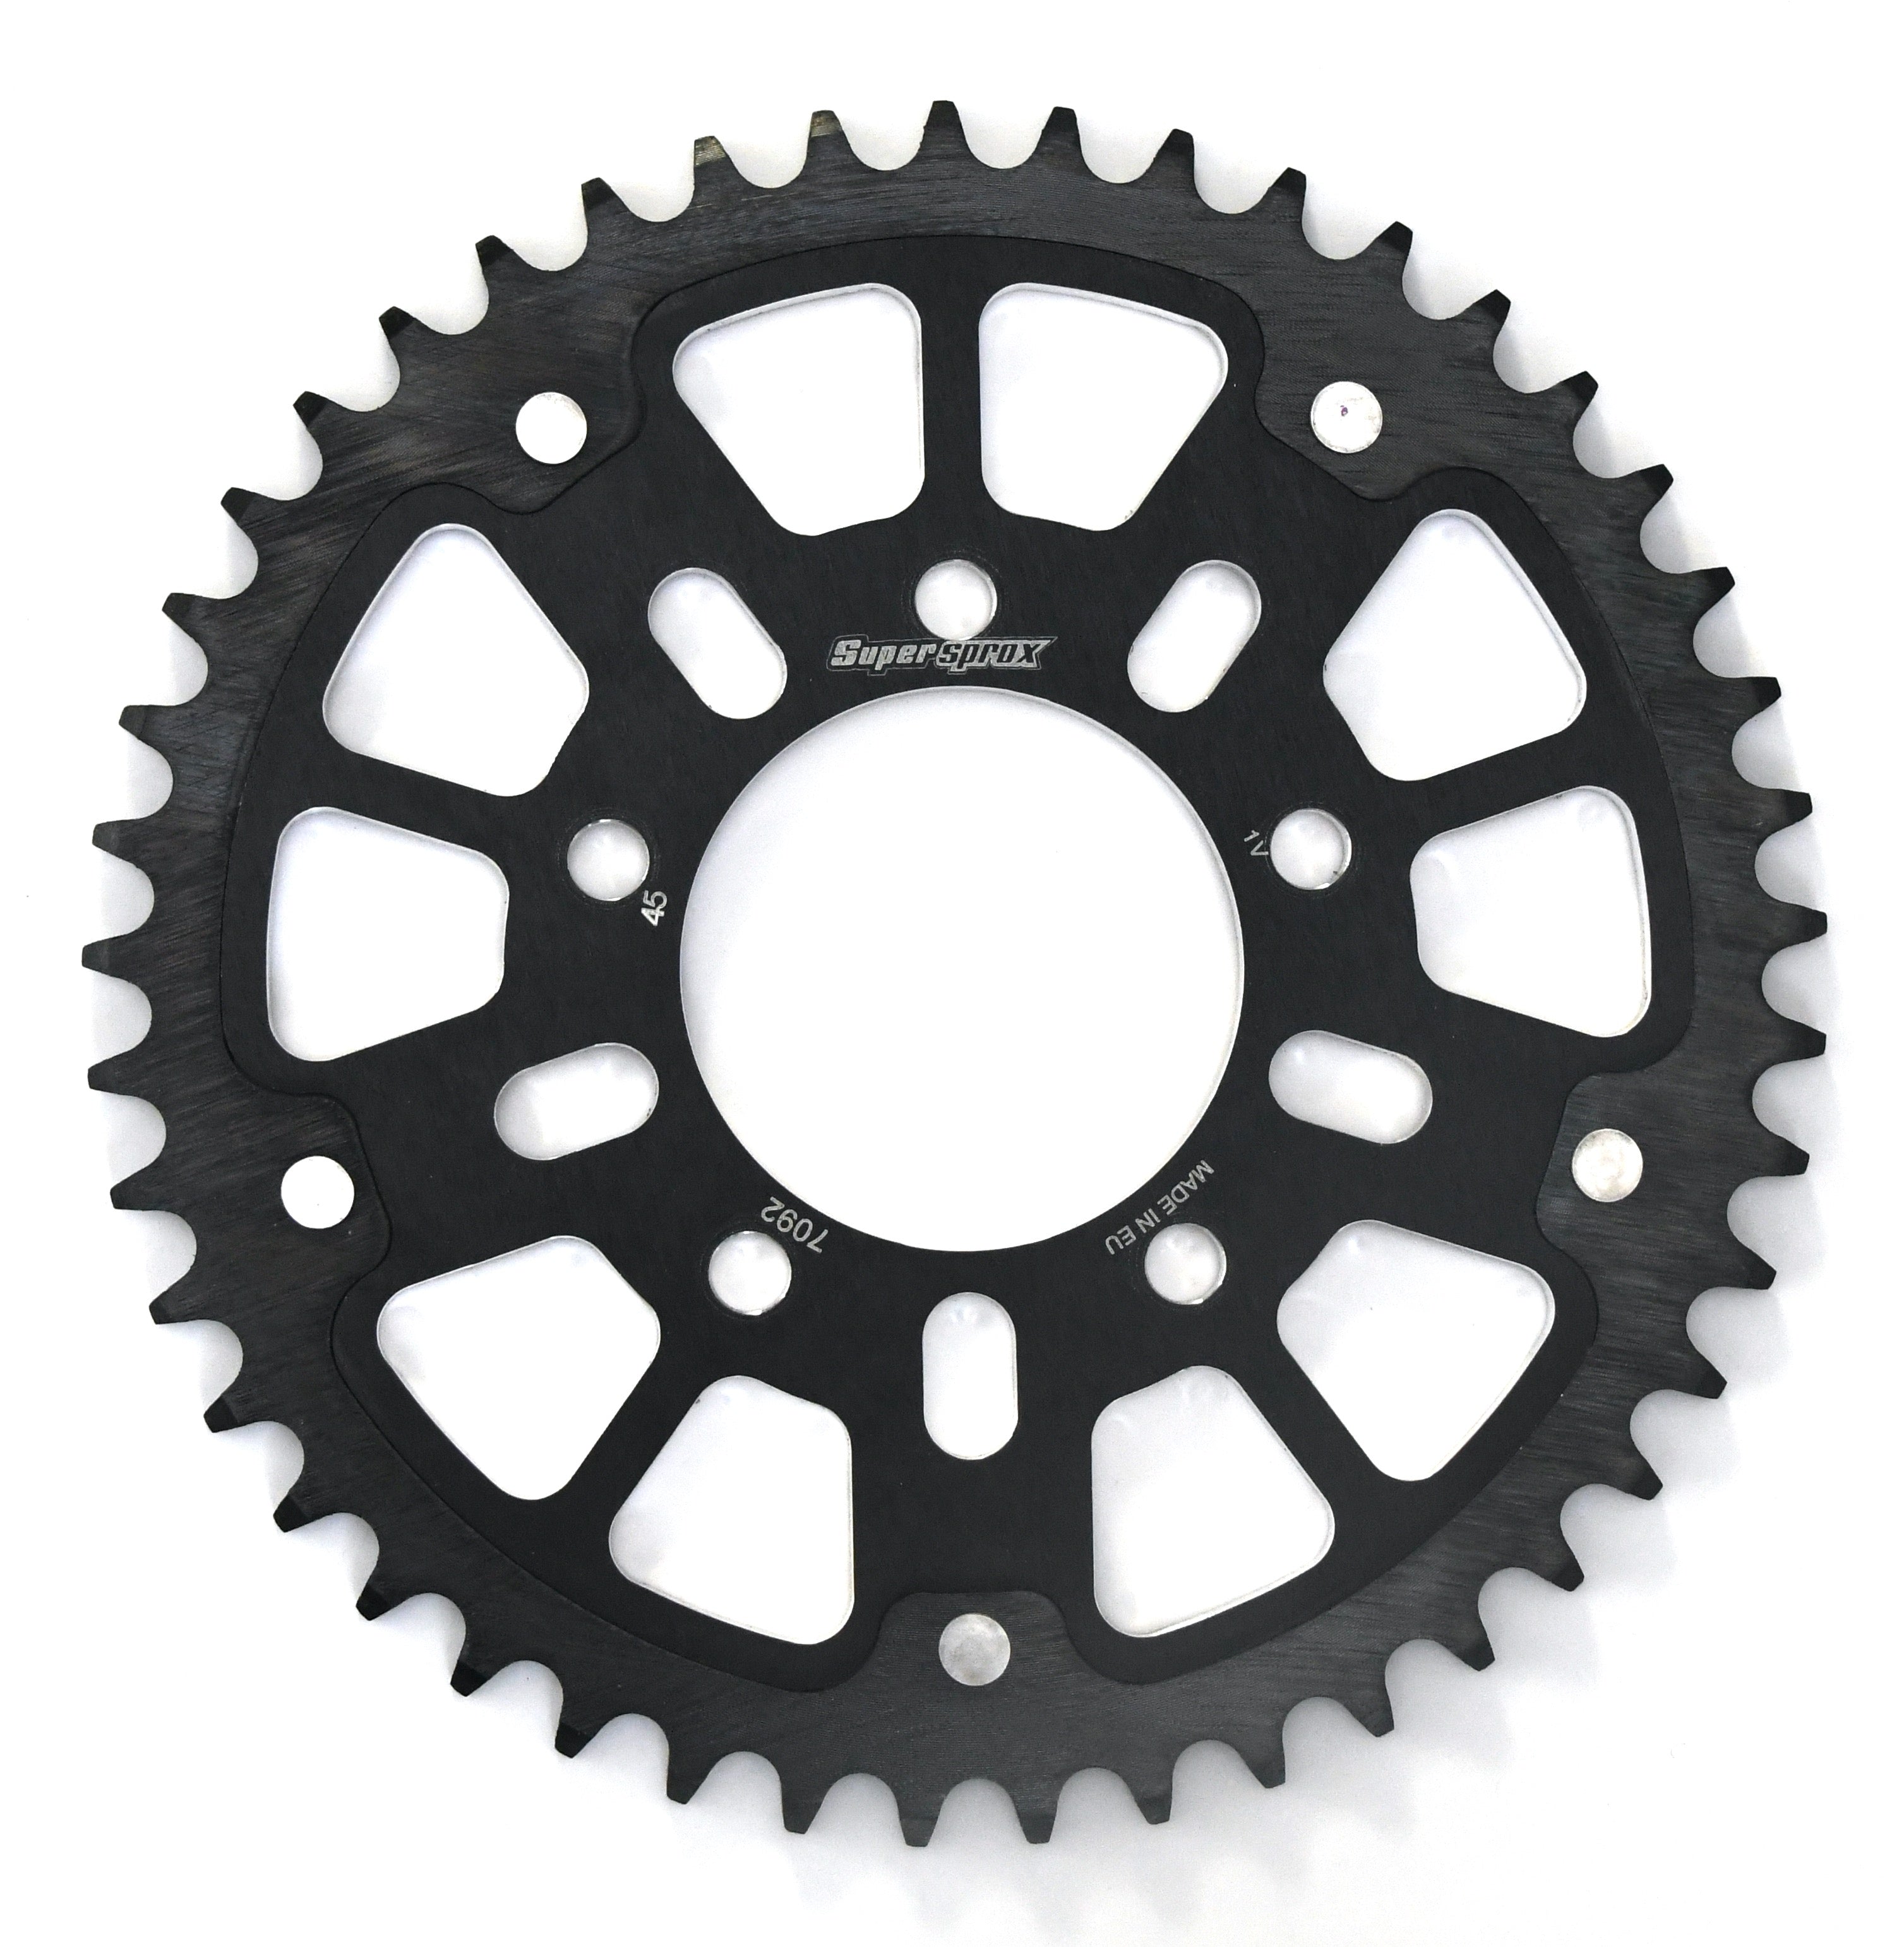 Supersprox Stealth 525 Pitch Rear Sprocket RST-7092:45 - (525, 76mm Centre, 100mm PCD) - 0